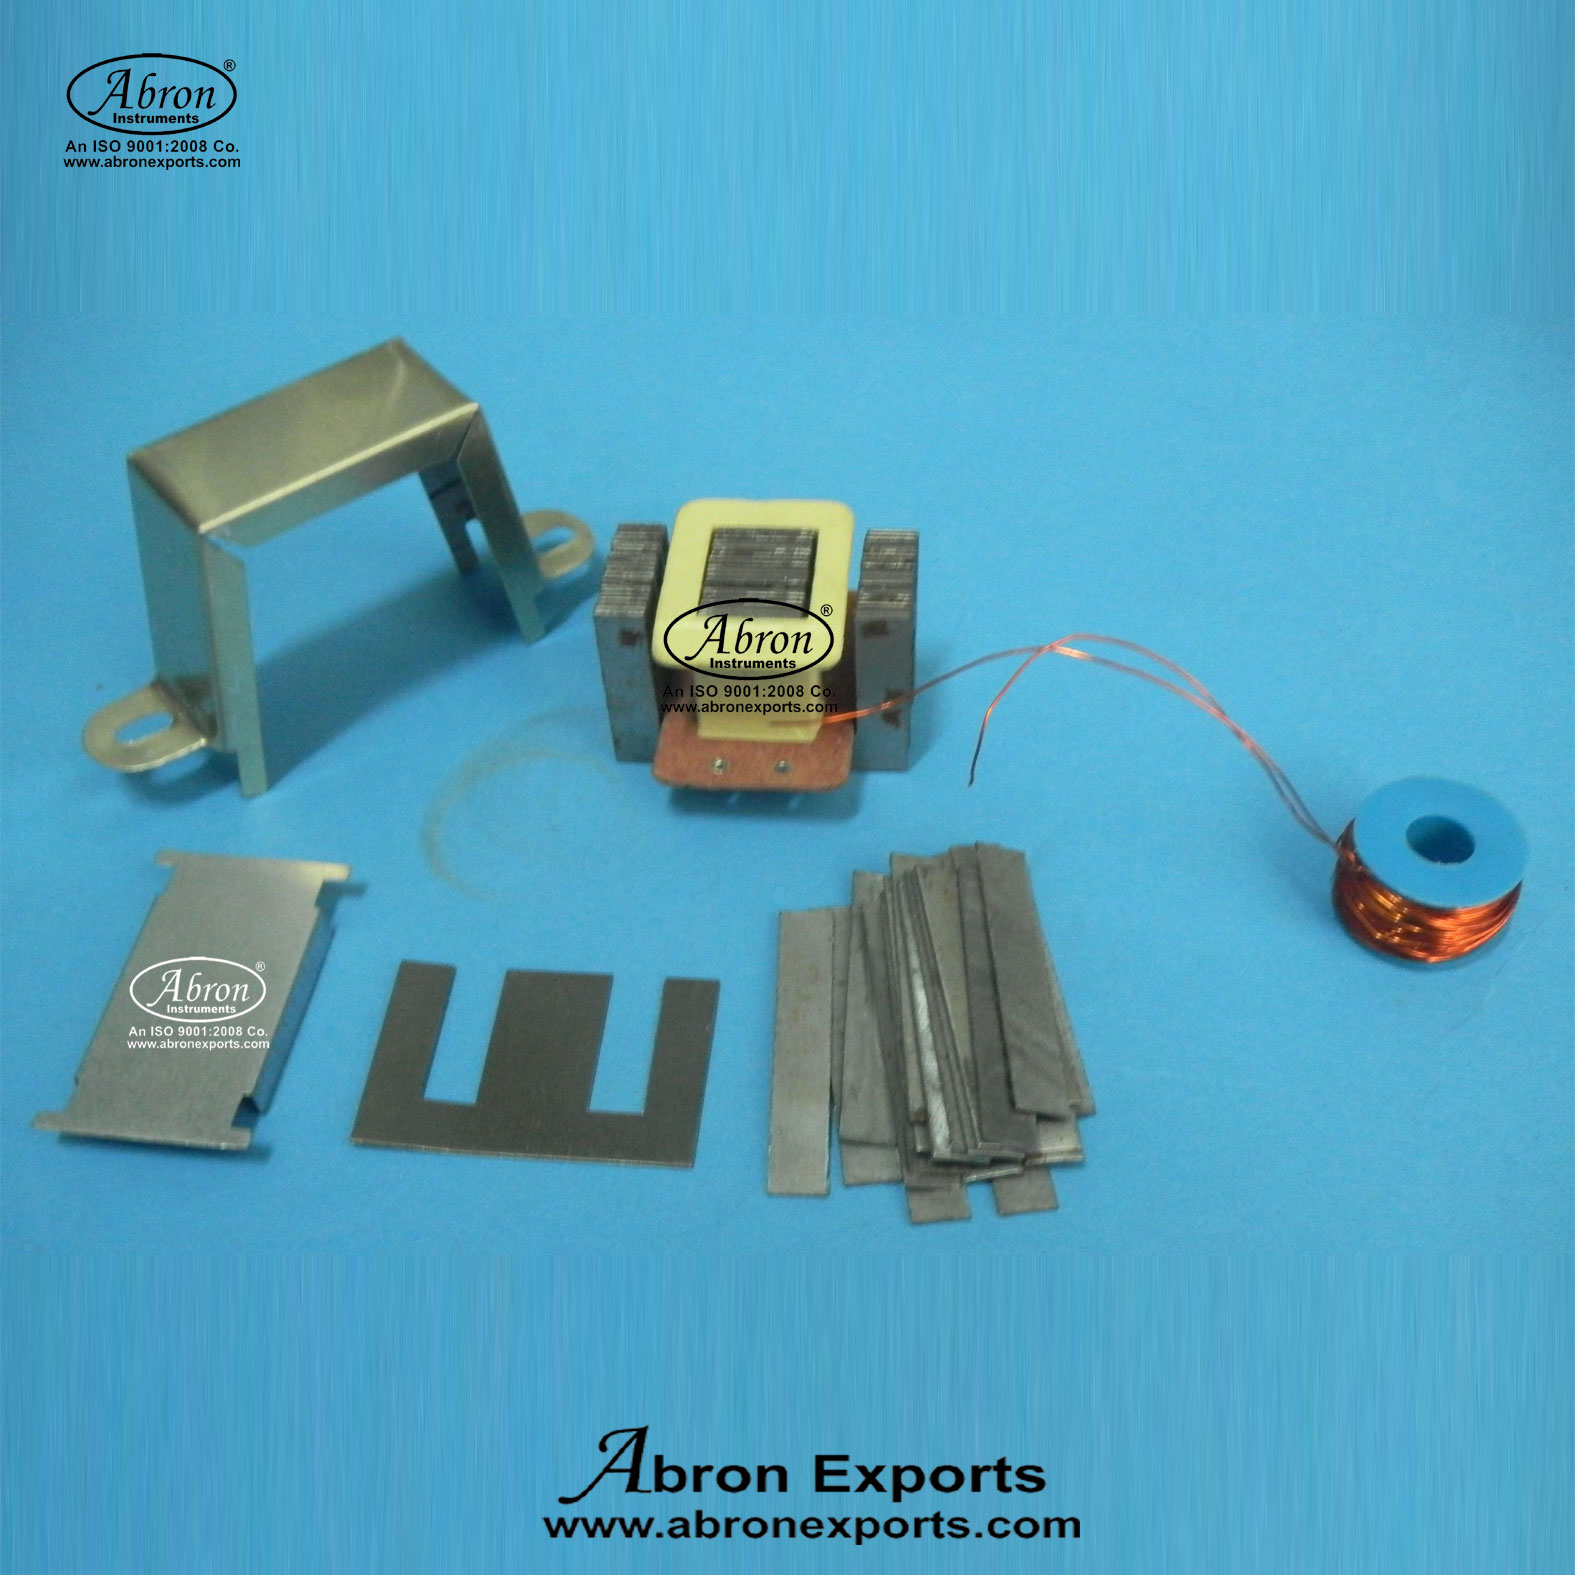 Kit for making transformer i core bobin with wire Abron AE-1429Q